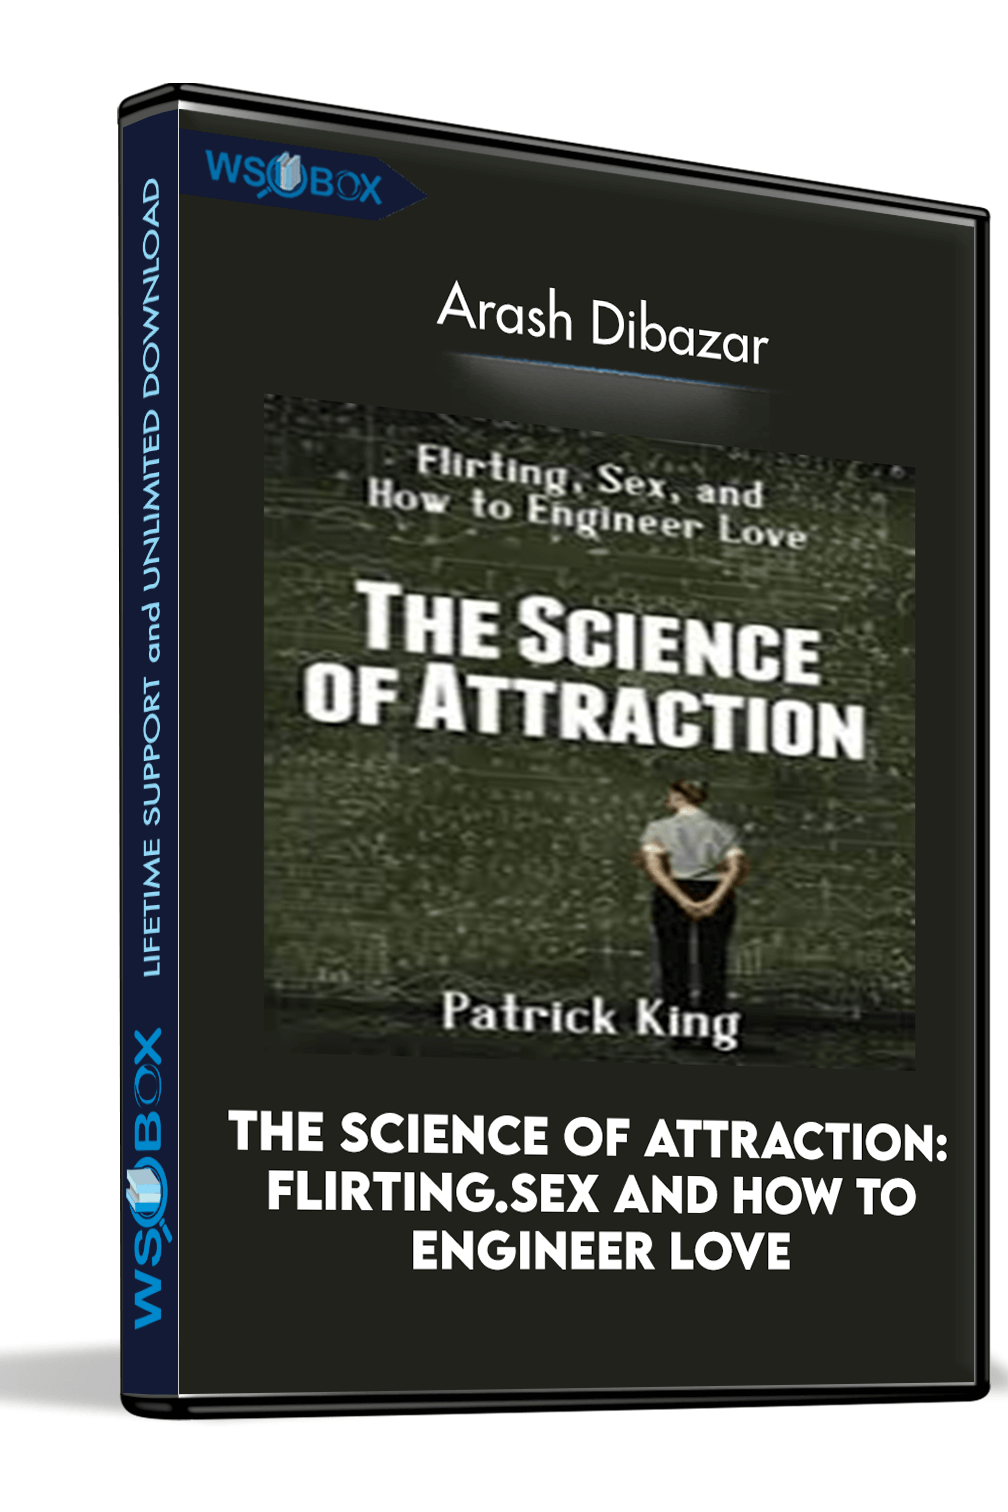 the-science-of-attraction-flirtingsex-and-how-to-engineer-love-arash-dibazar